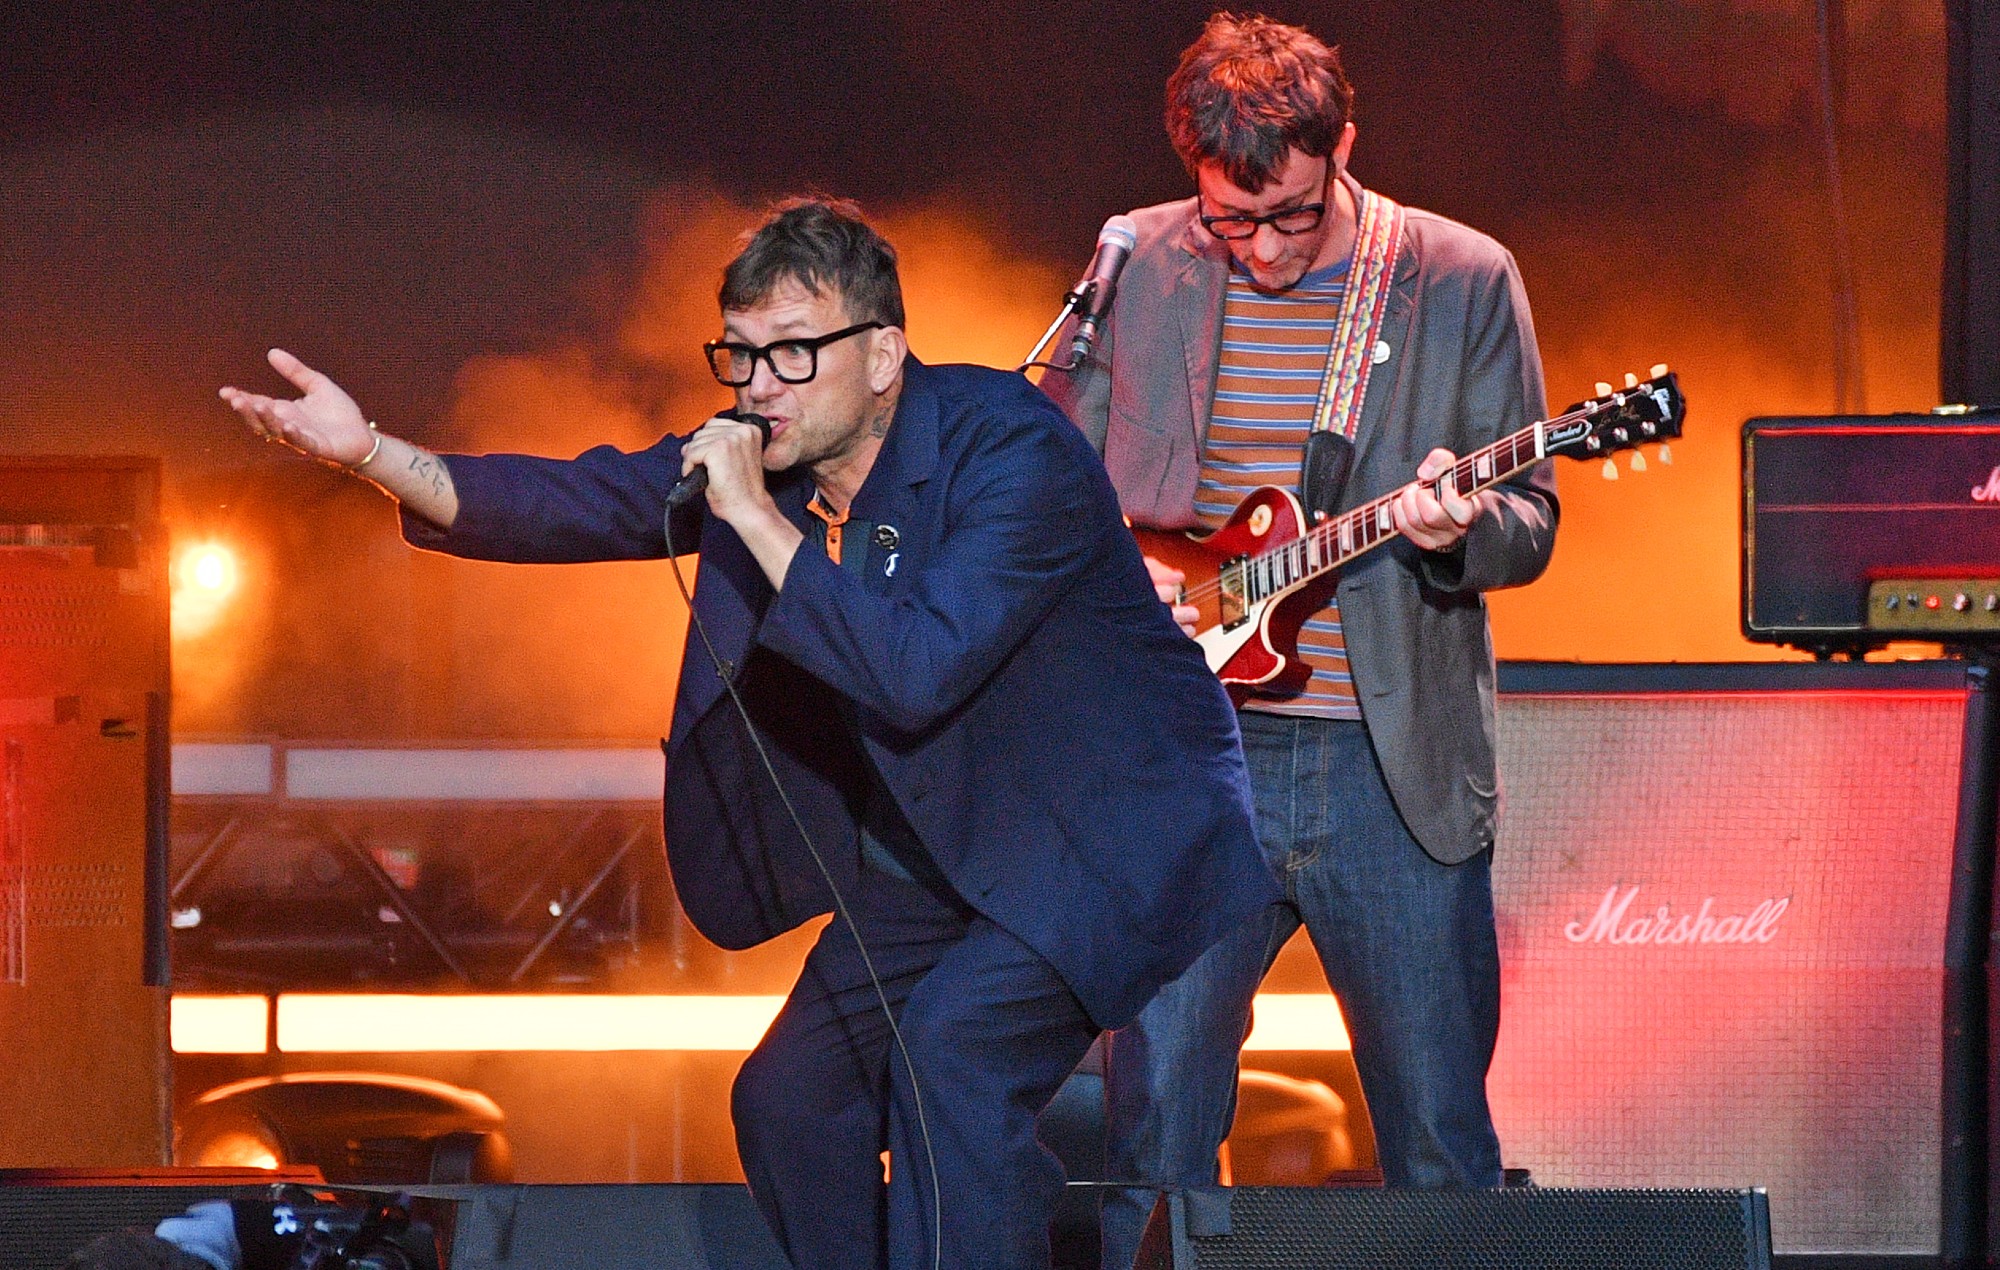 Here’s what Blur performed at Wembley